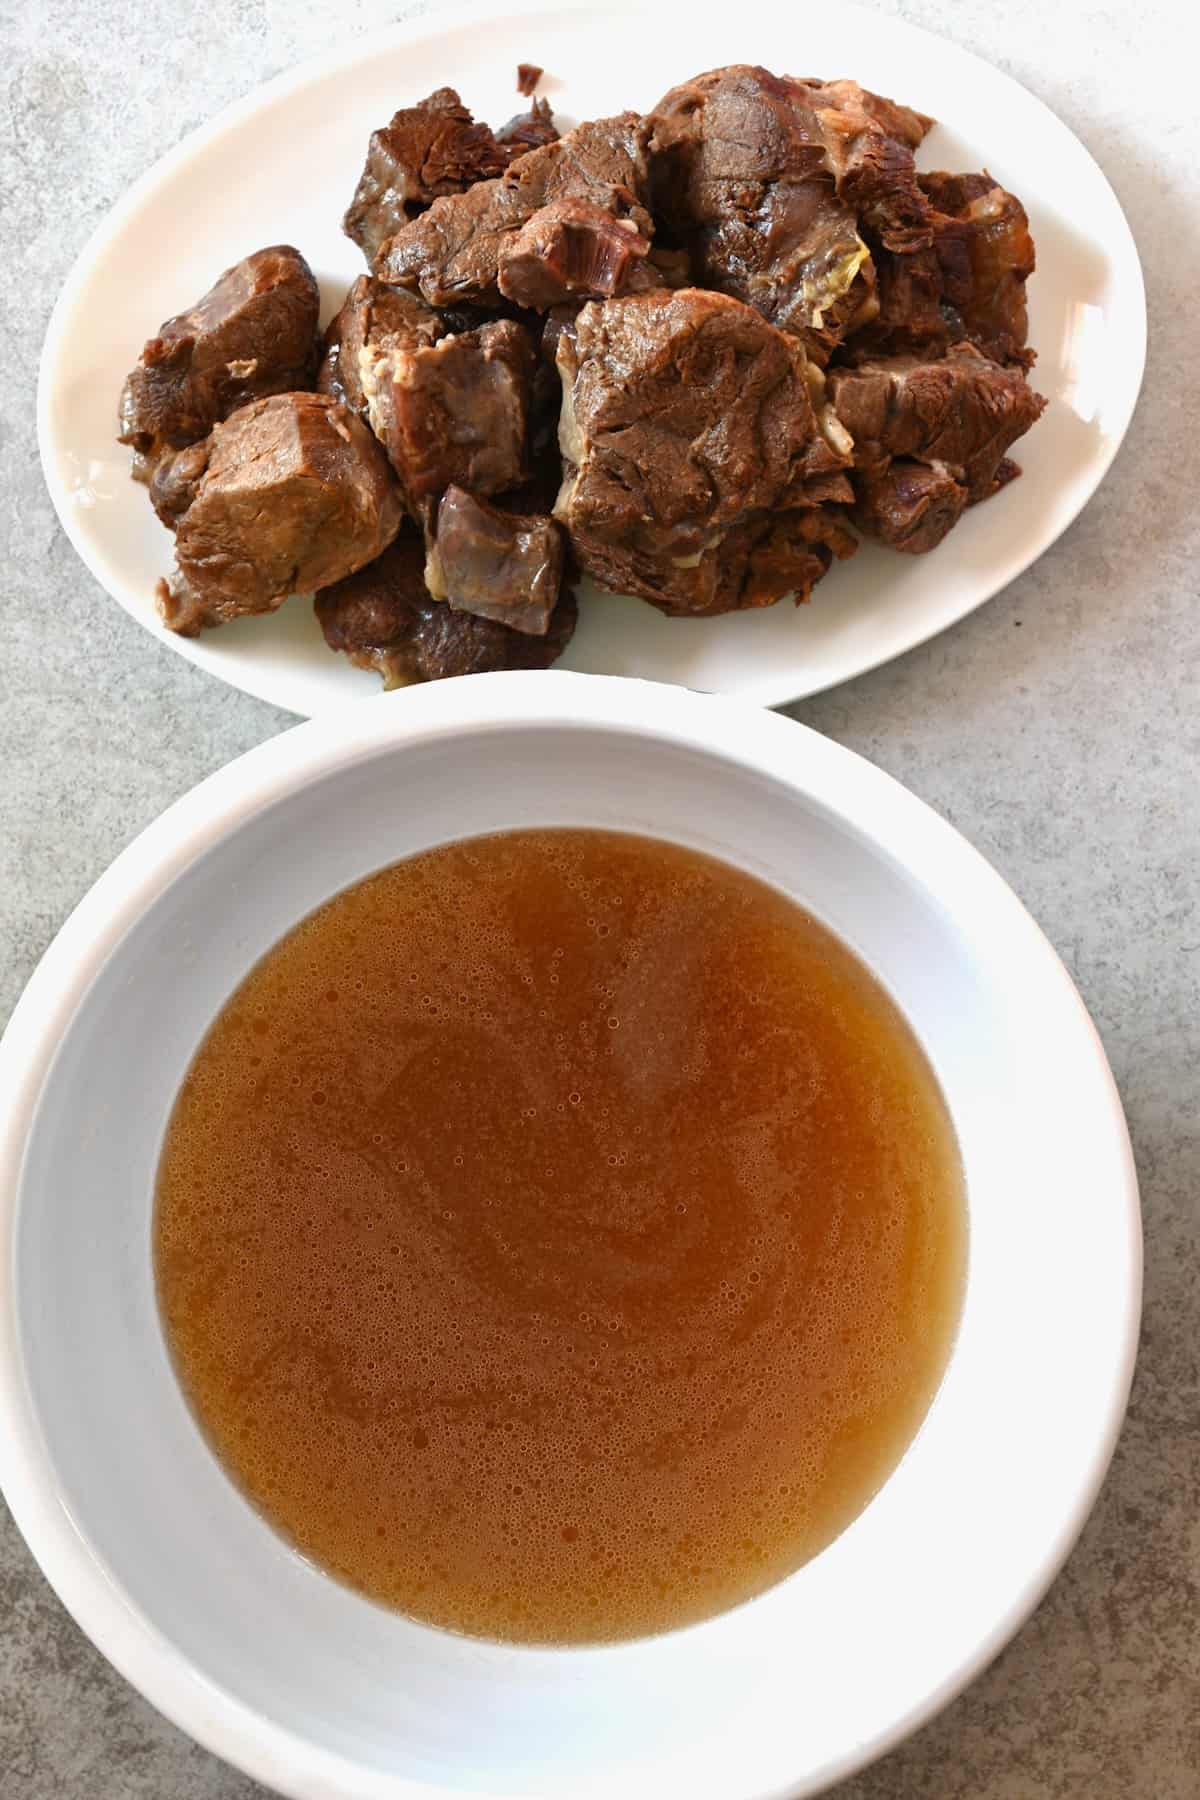 A bowl with beef broth and a plate with cooked meat